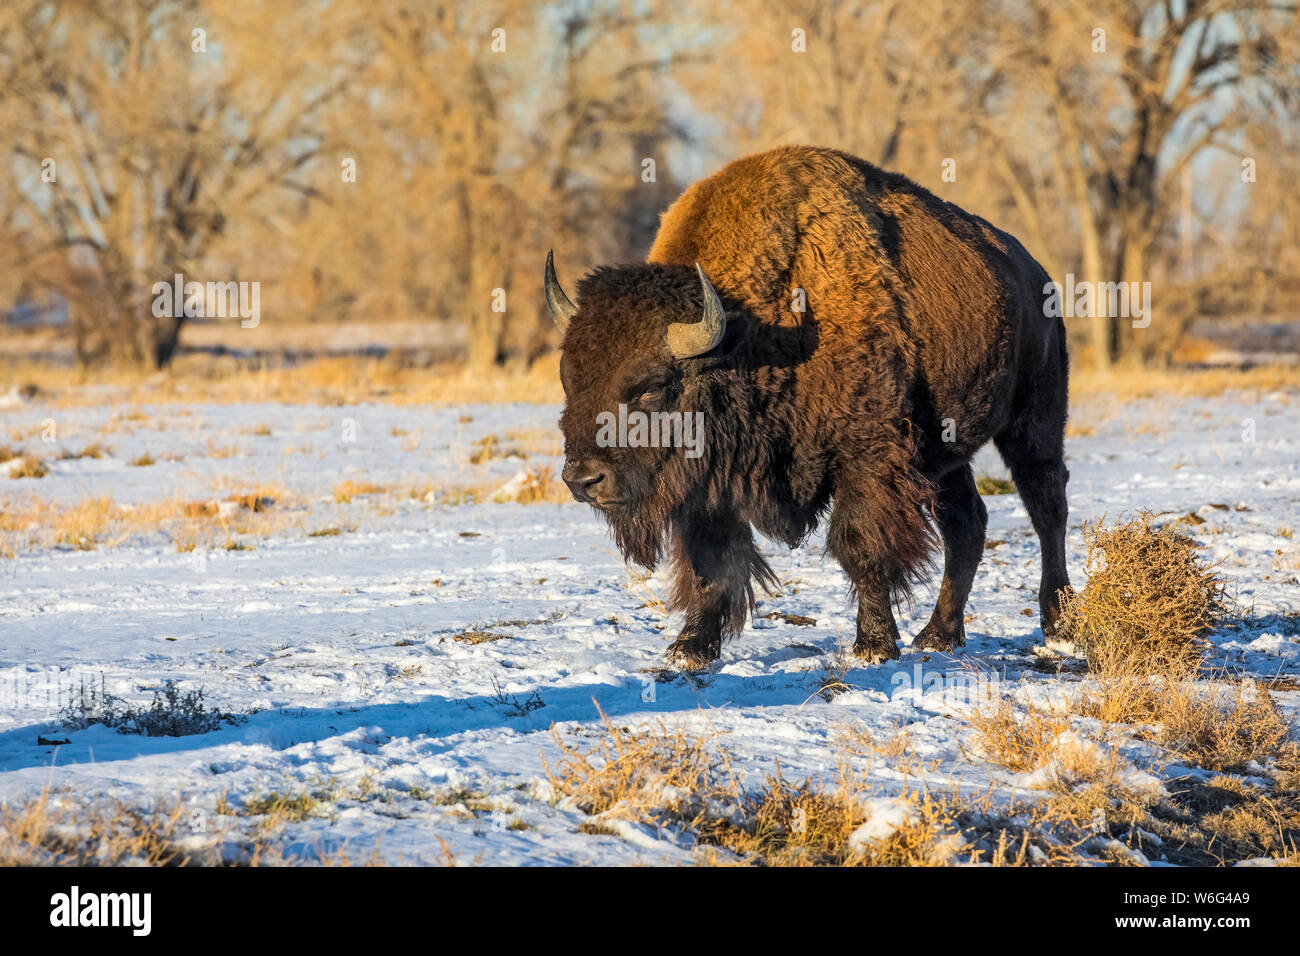 Bison (Bison bison) in a snow-covered field; Denver, Colorado, United States of America Stock Photo